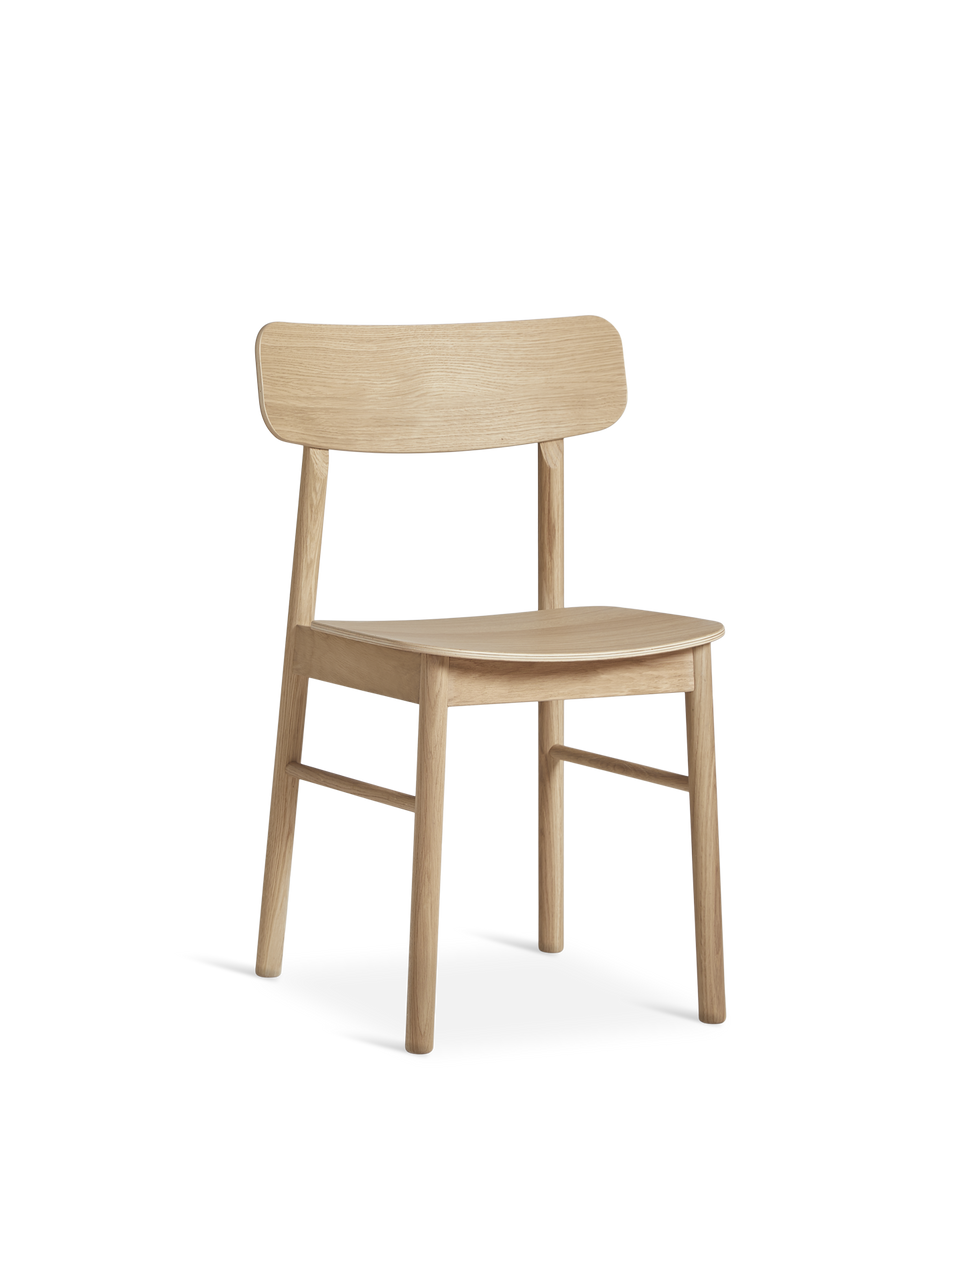 soma dining chair white pigmented oak